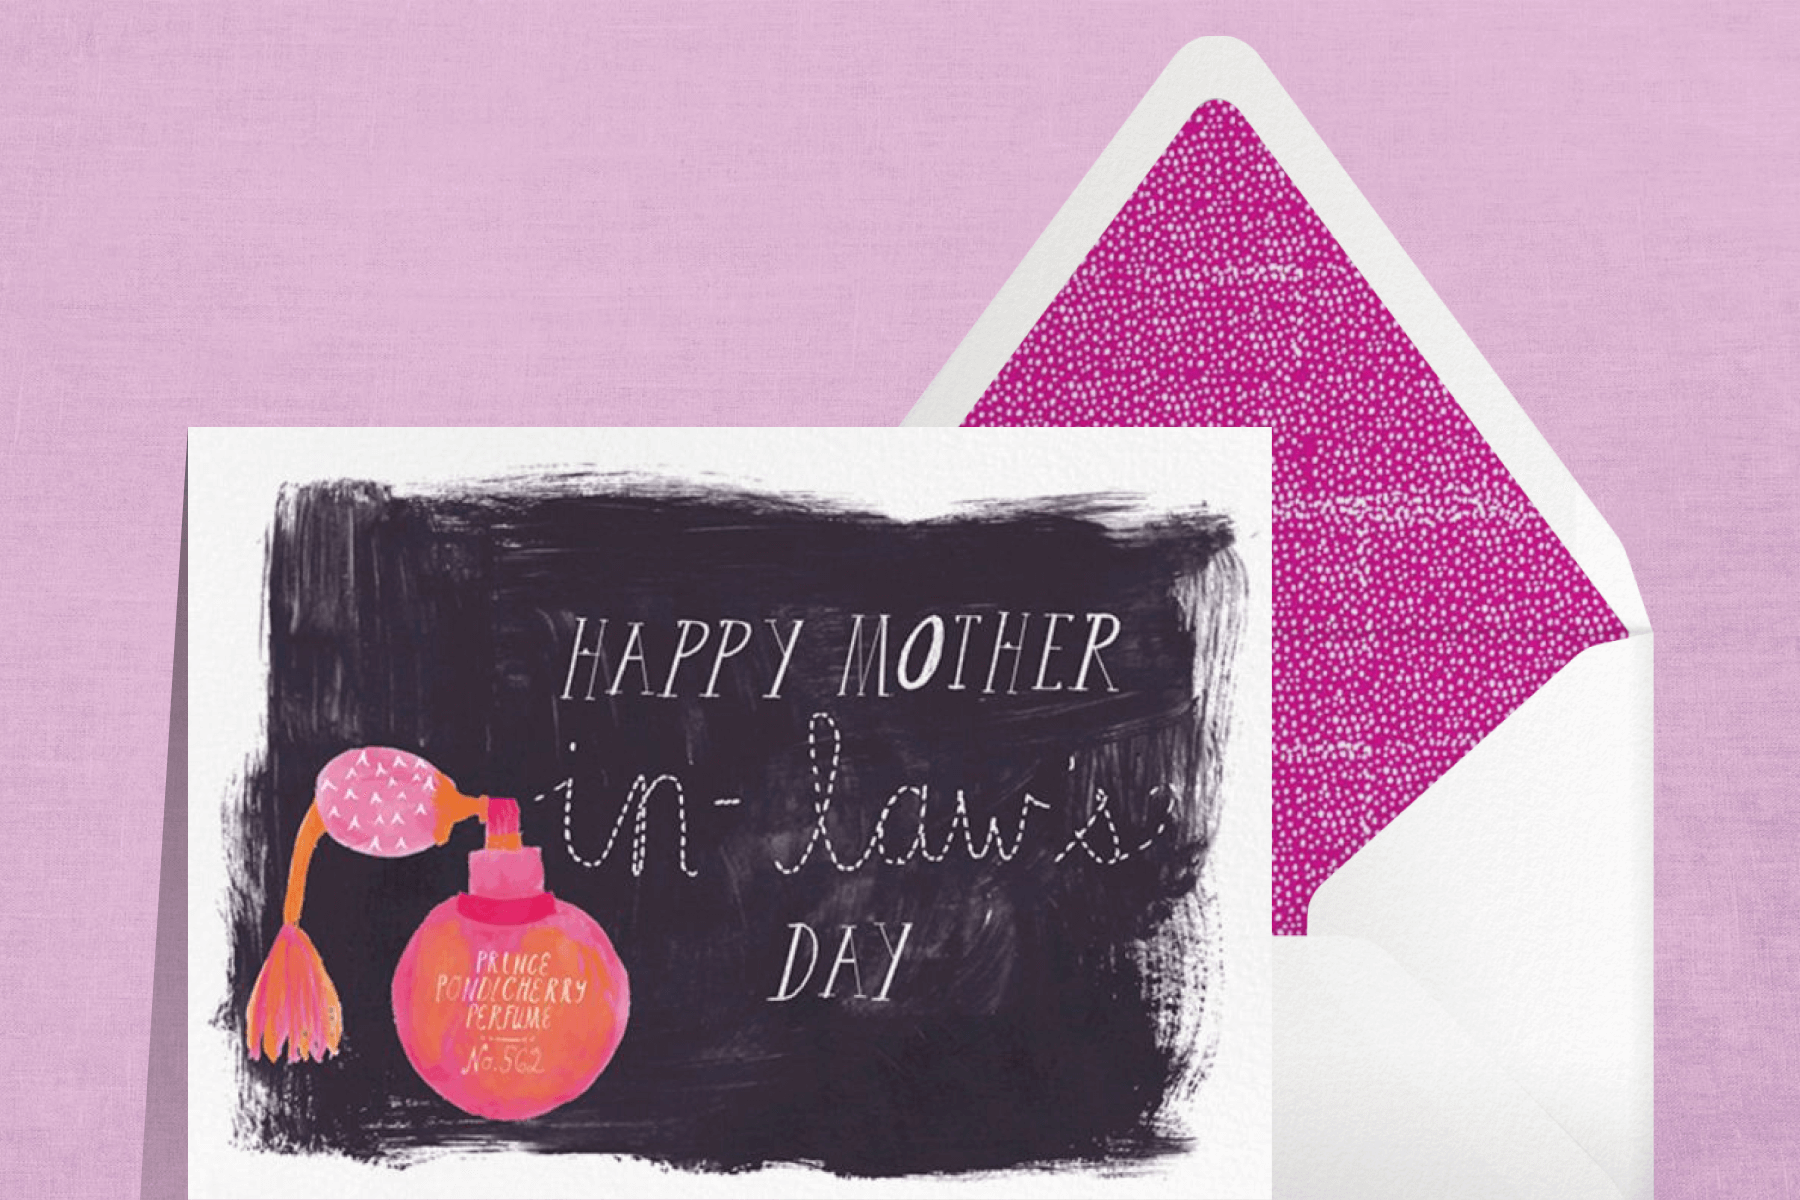 A Mother’s Day card showing a perfume bottle and the phrase “Happy Mother In-Law’s Day.”